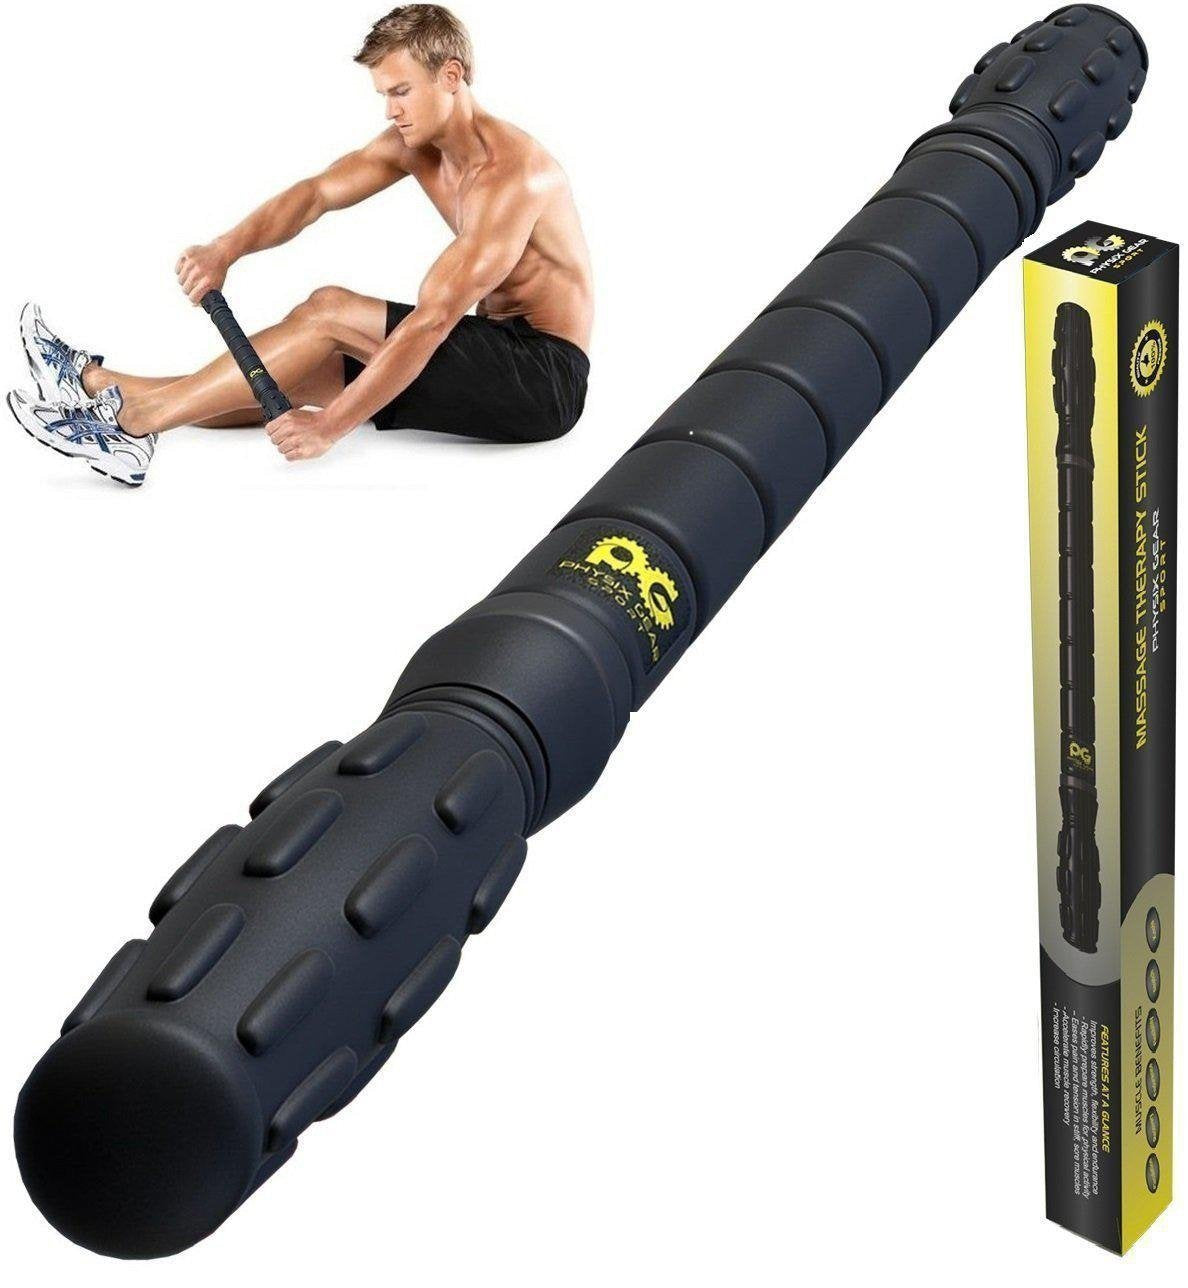 Buy Top Quality Accessories to Build Muscles and Recover Pain-Physix Gear Sport